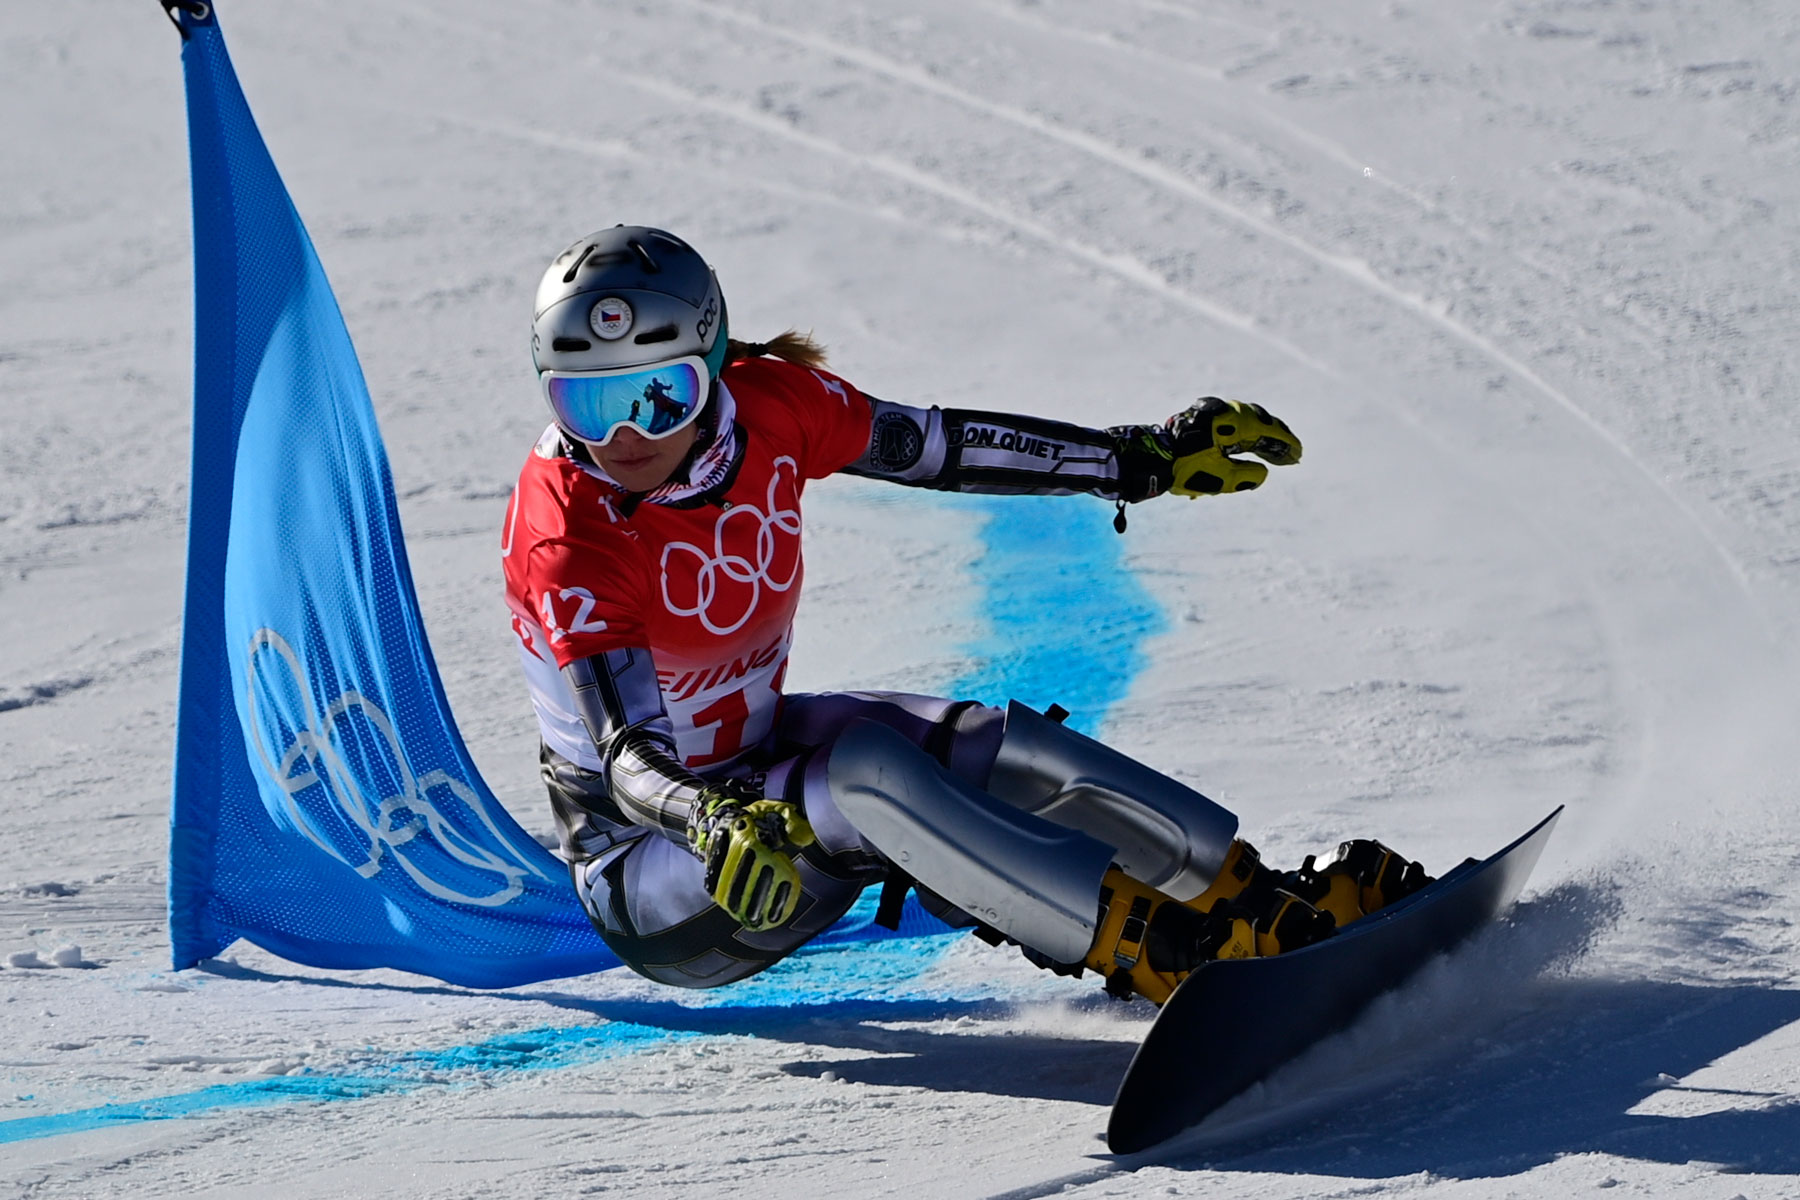 Czech snowboarder Ester Ledecka competes during the women's parallel giant slalom qualifications on Tuesday.